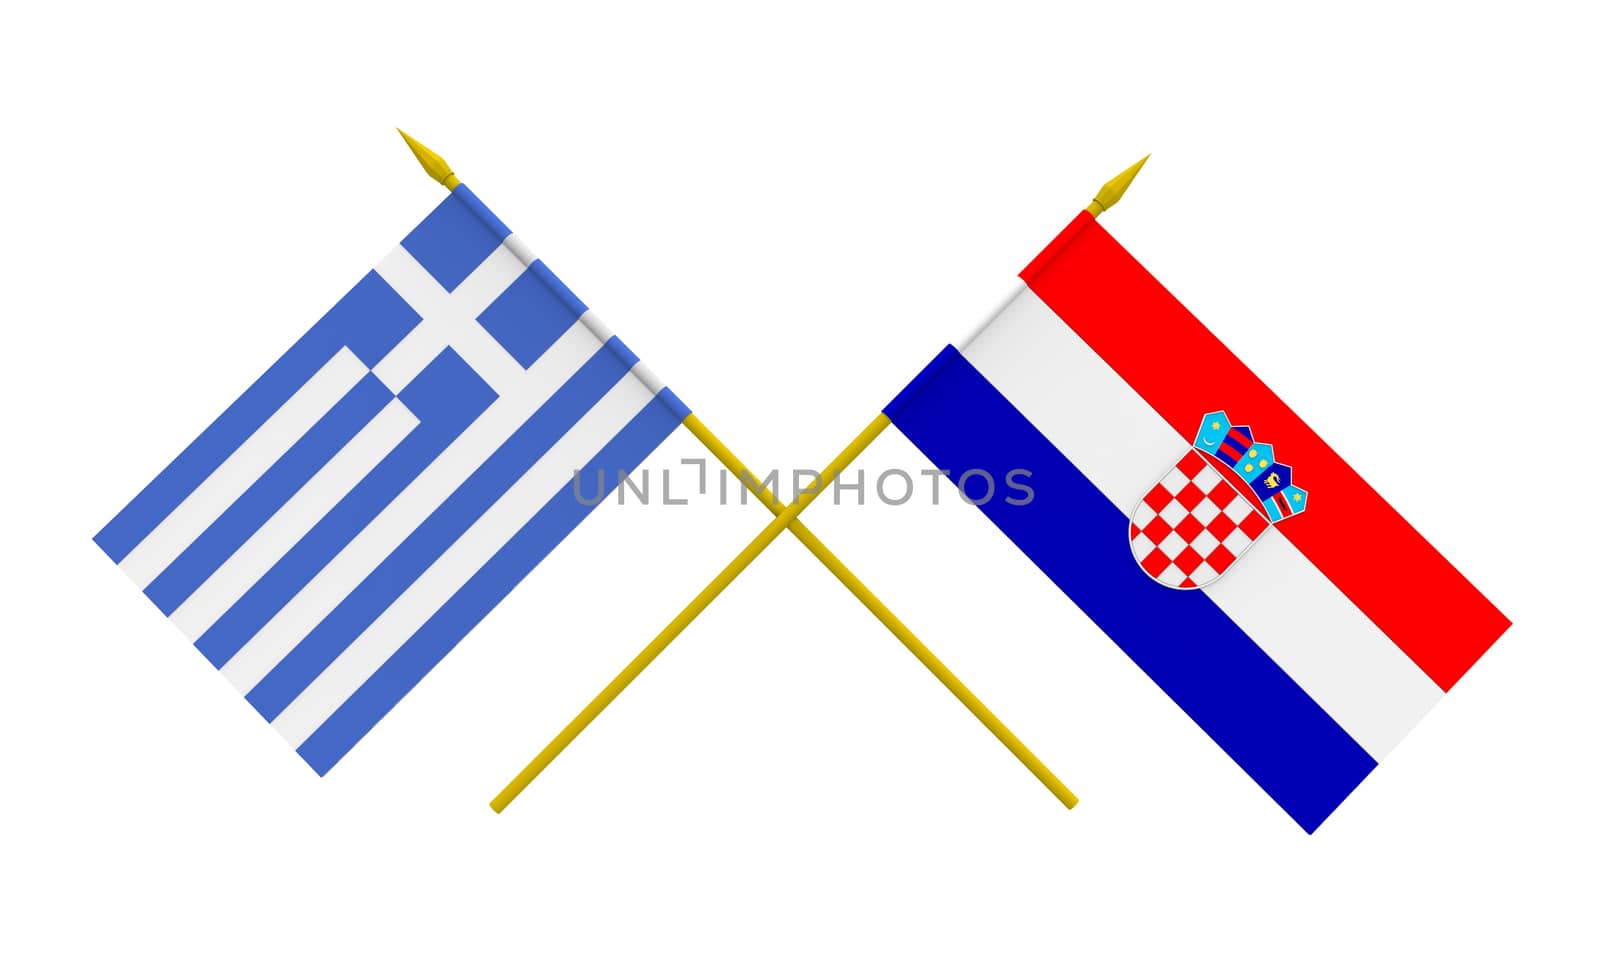 Flags of Croatia and Greece, 3d render, isolated